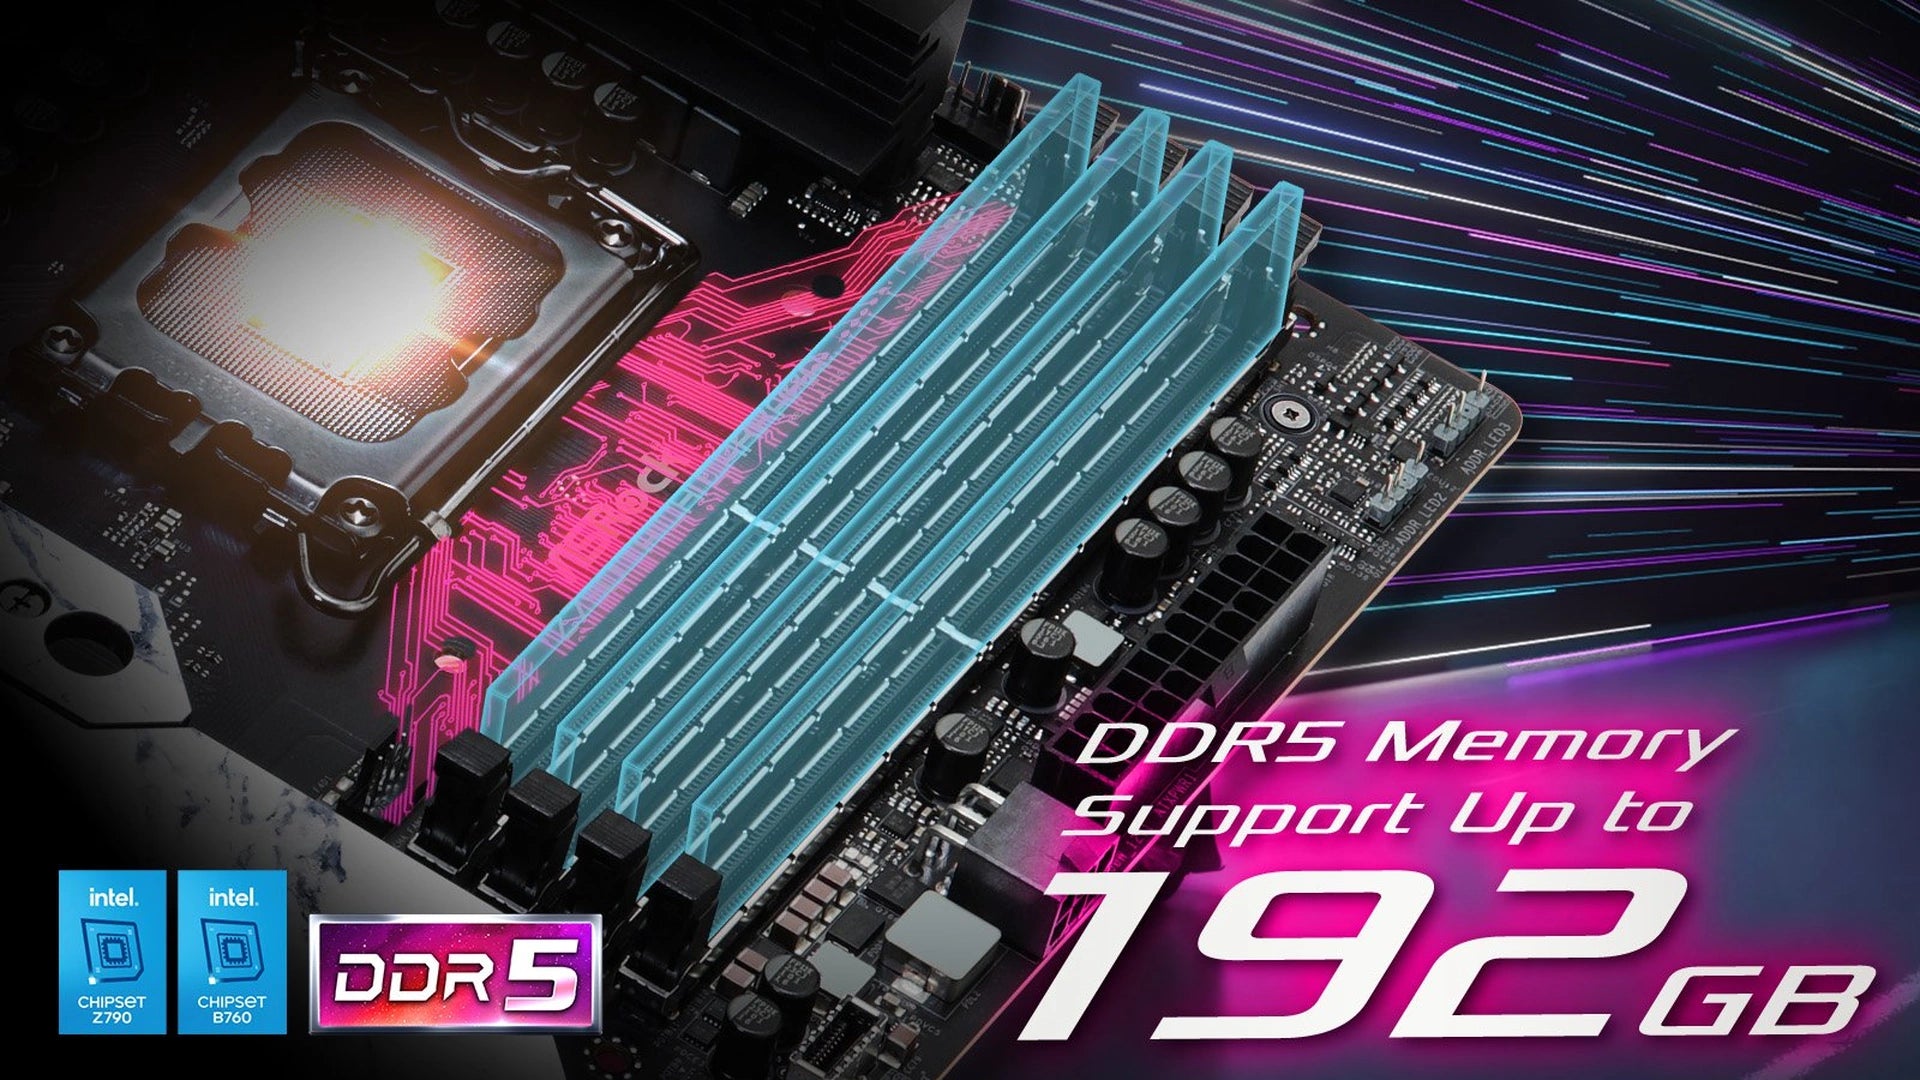 ASRock Intel® 700/600 Series Motherboards Now Support Memory Capacity up to 192GB!